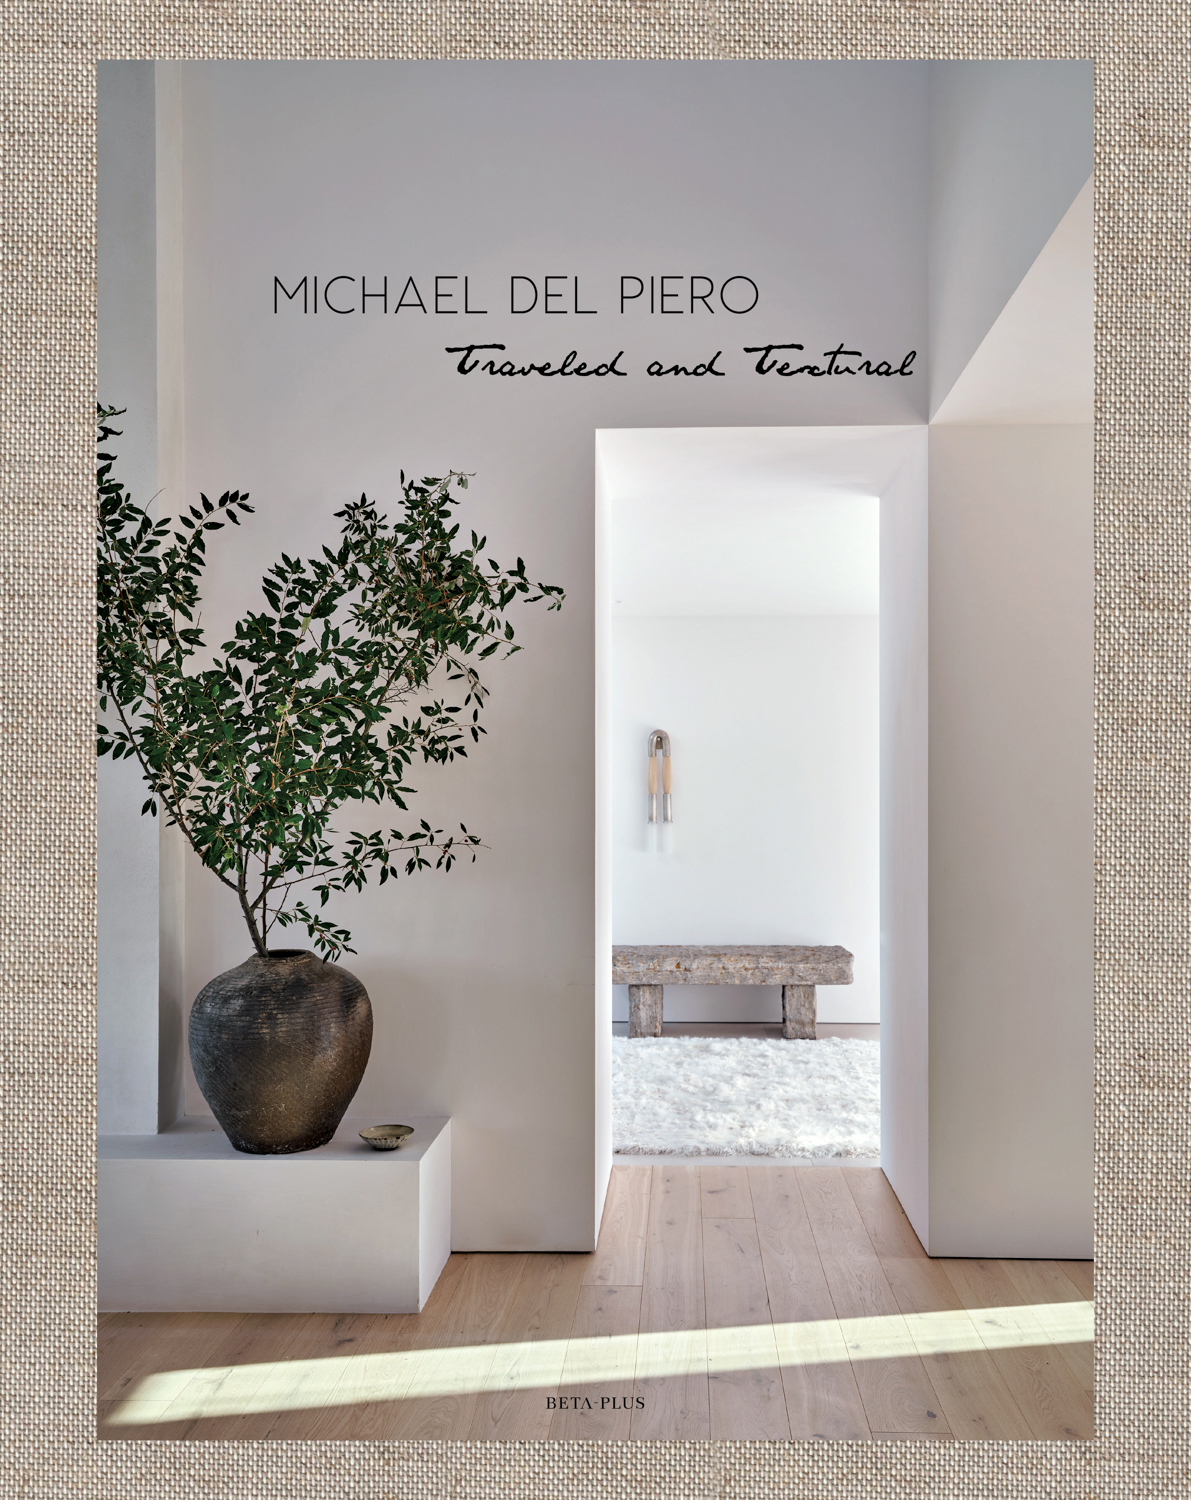 Michael Del Piero book Traveled and Textural